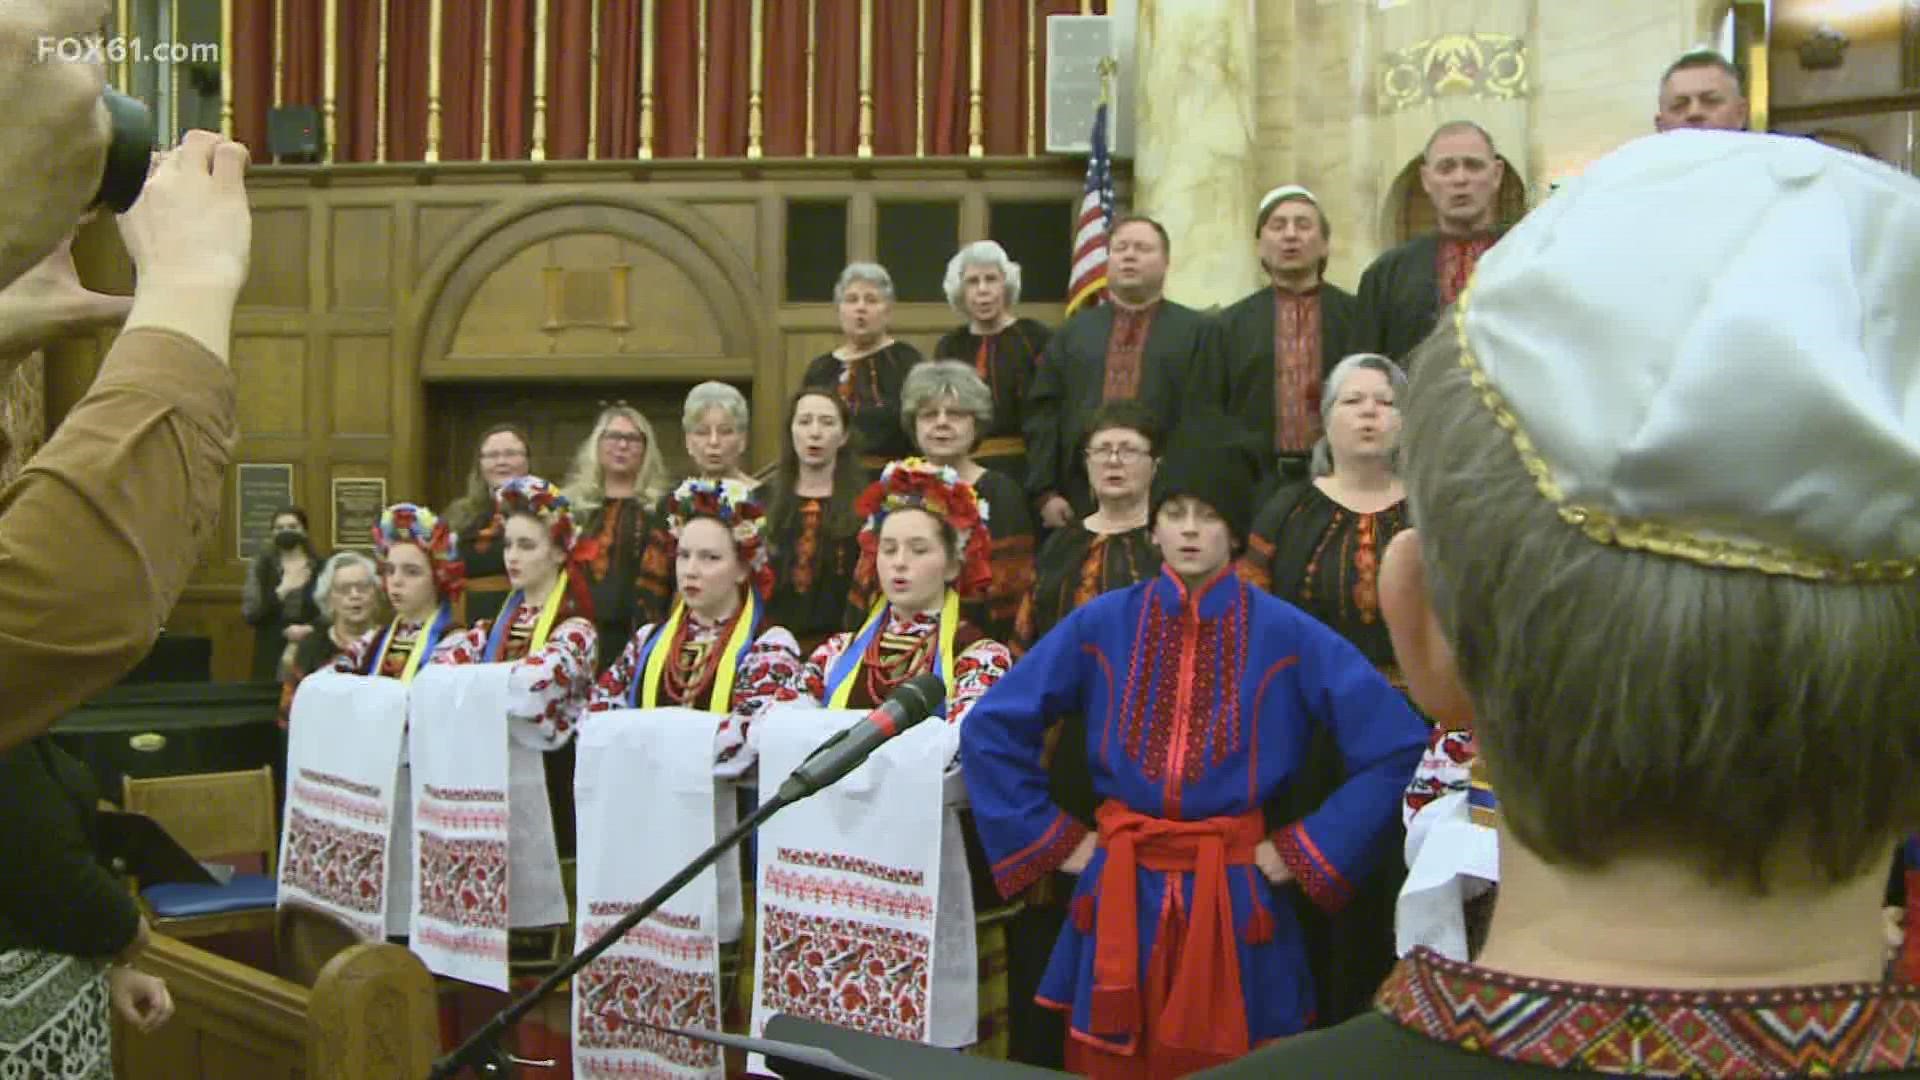 The concert was held at Congregation Beth Israel in West Hartford to benefit three organizations on the ground in Ukraine.